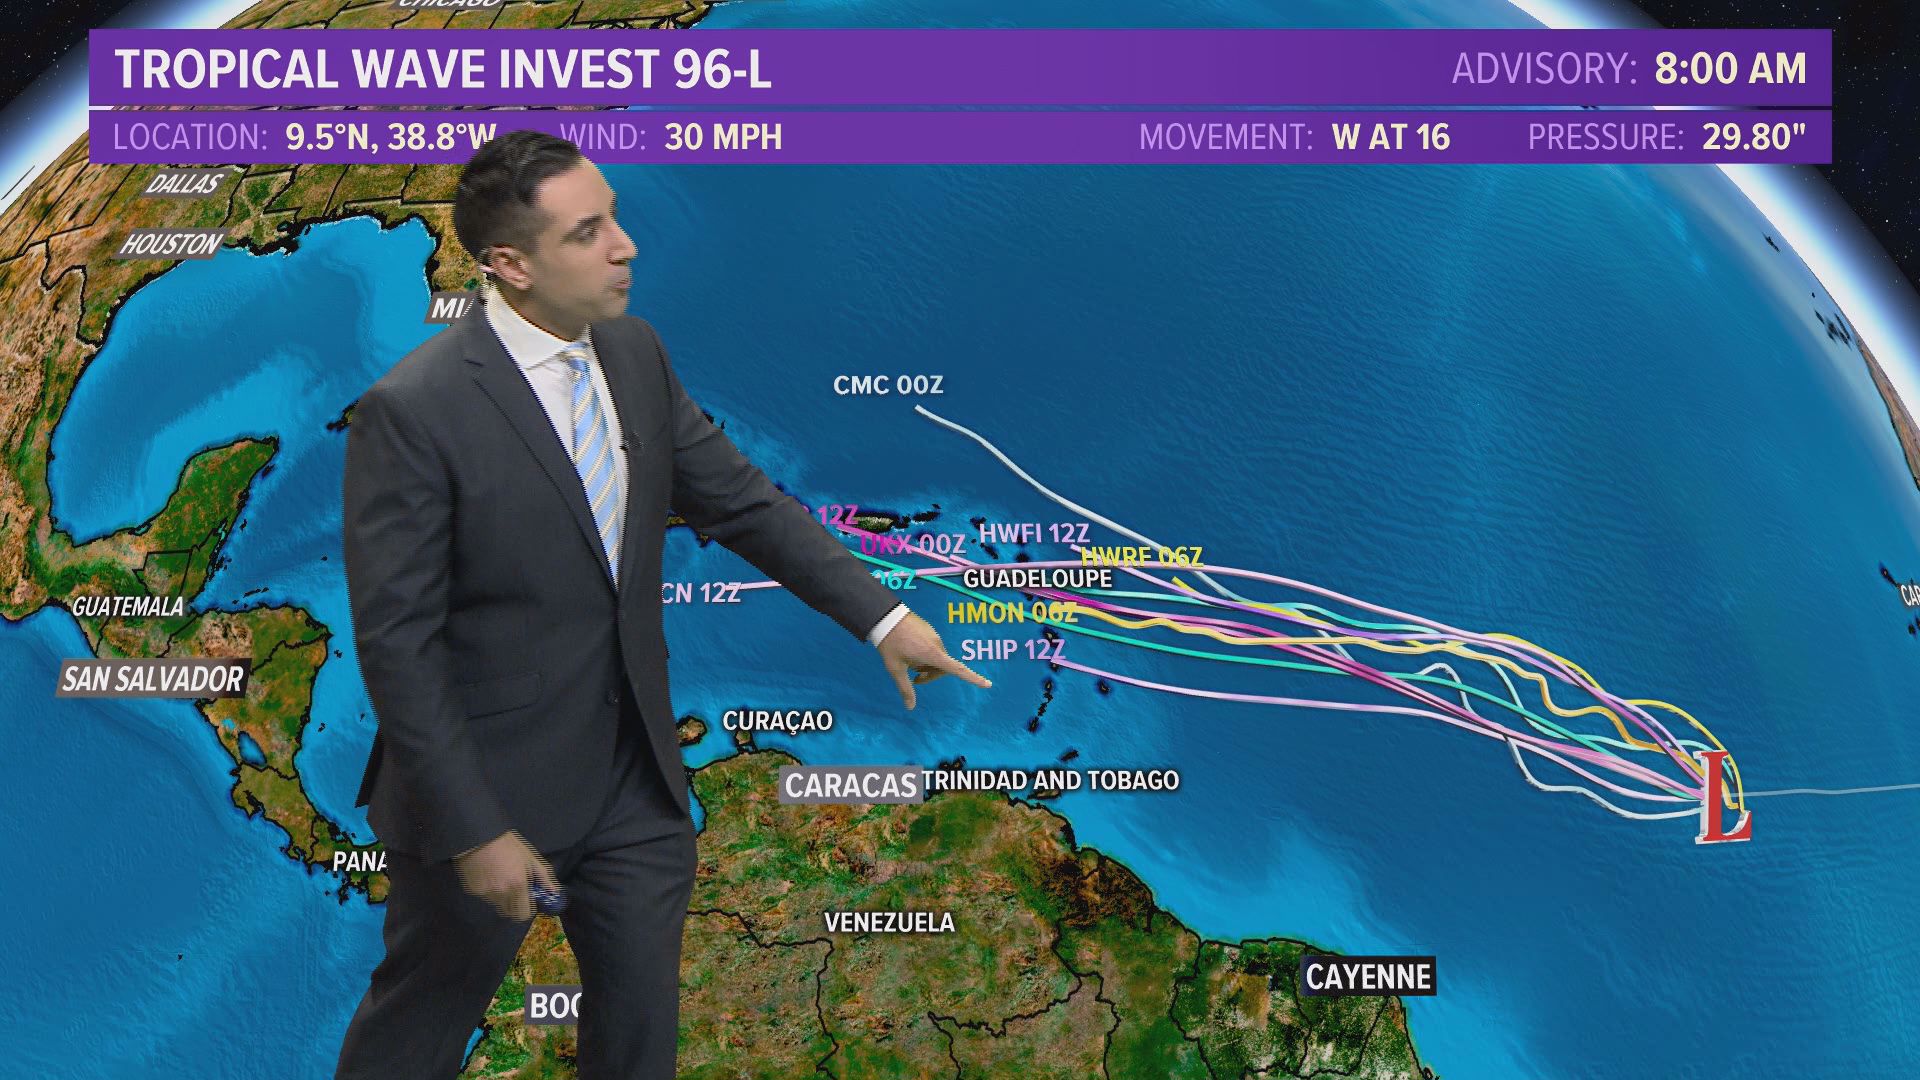 13News Meteorologist Tim Pandajis has the latest on Hurricane Erick, Tropical Storm Flossie, and a potential system that is brewing in the Atlantic...